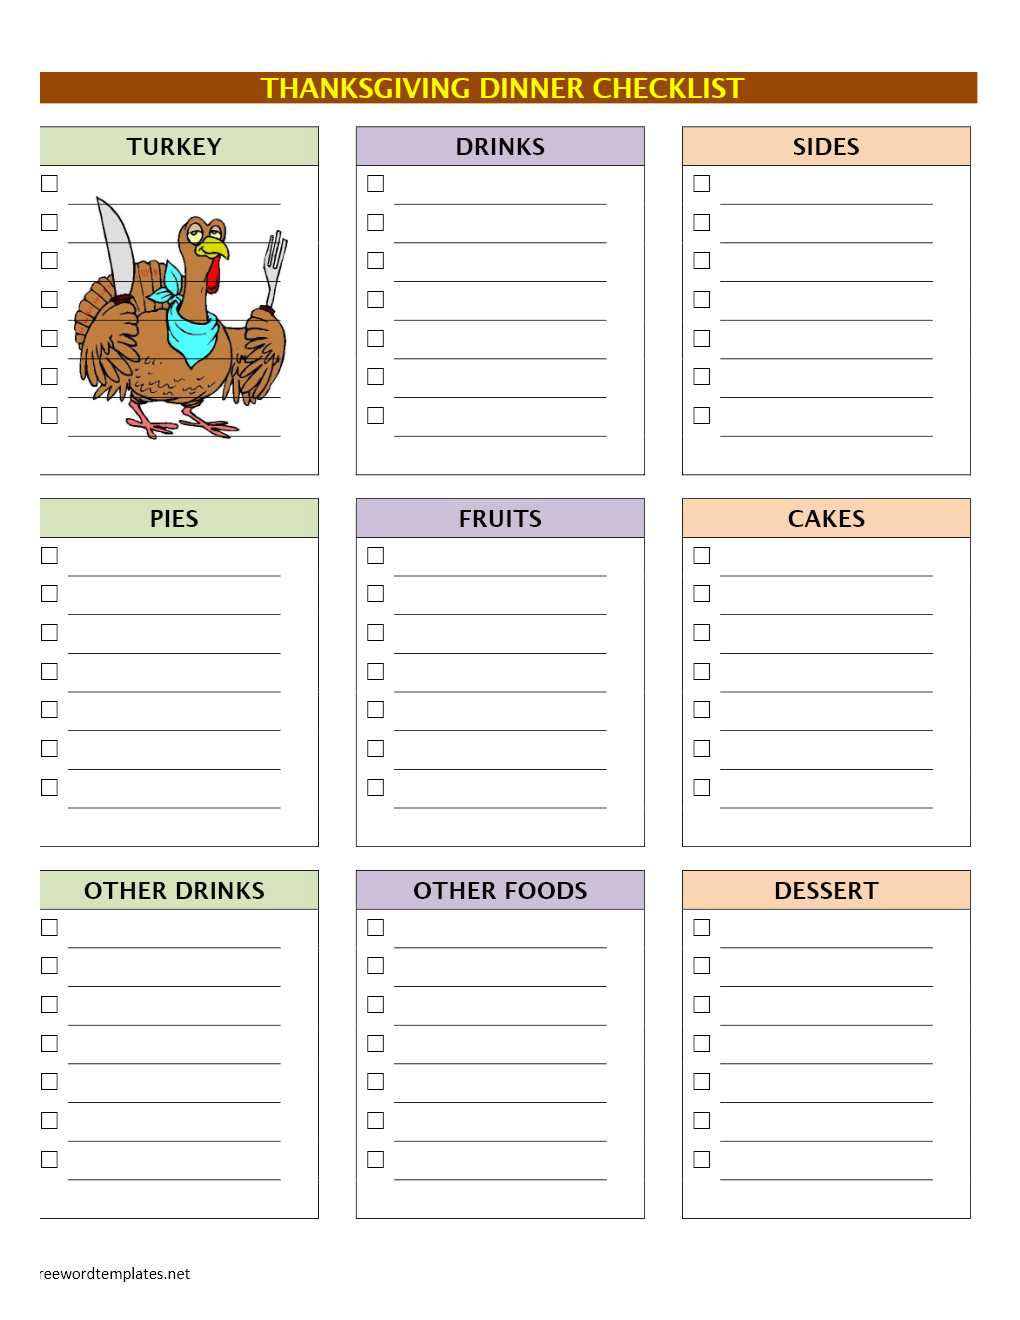 Top 15 Most Popular Planning Thanksgiving Dinner Checklist How to